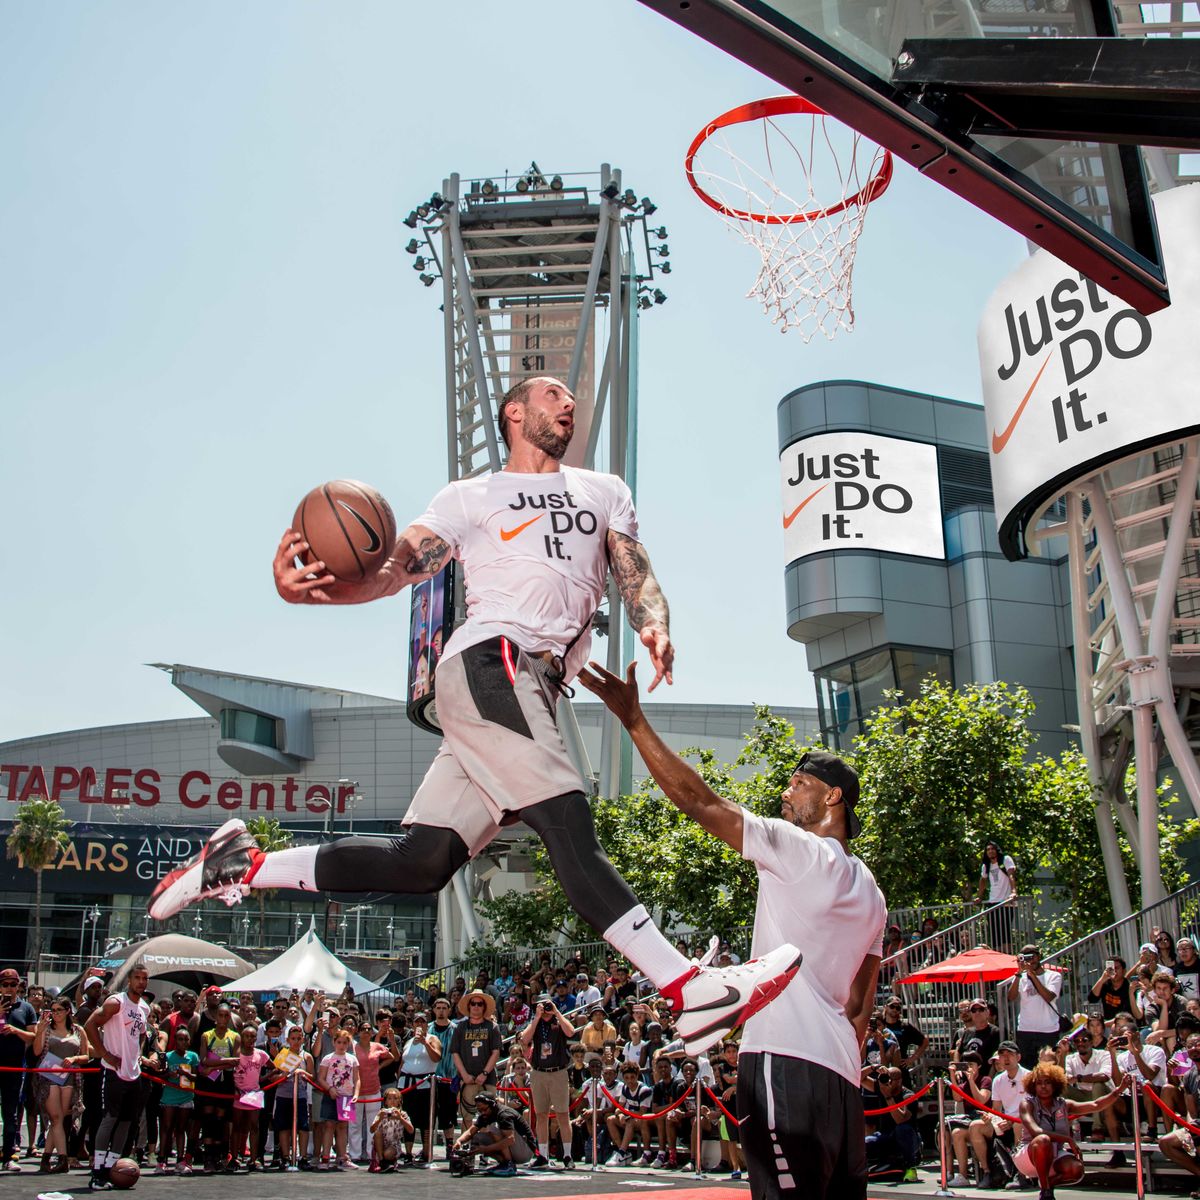 A man is mid jump during his slam dunk attempt at the Nike Basketball Slam Dunk Contest at L.A. LIVE